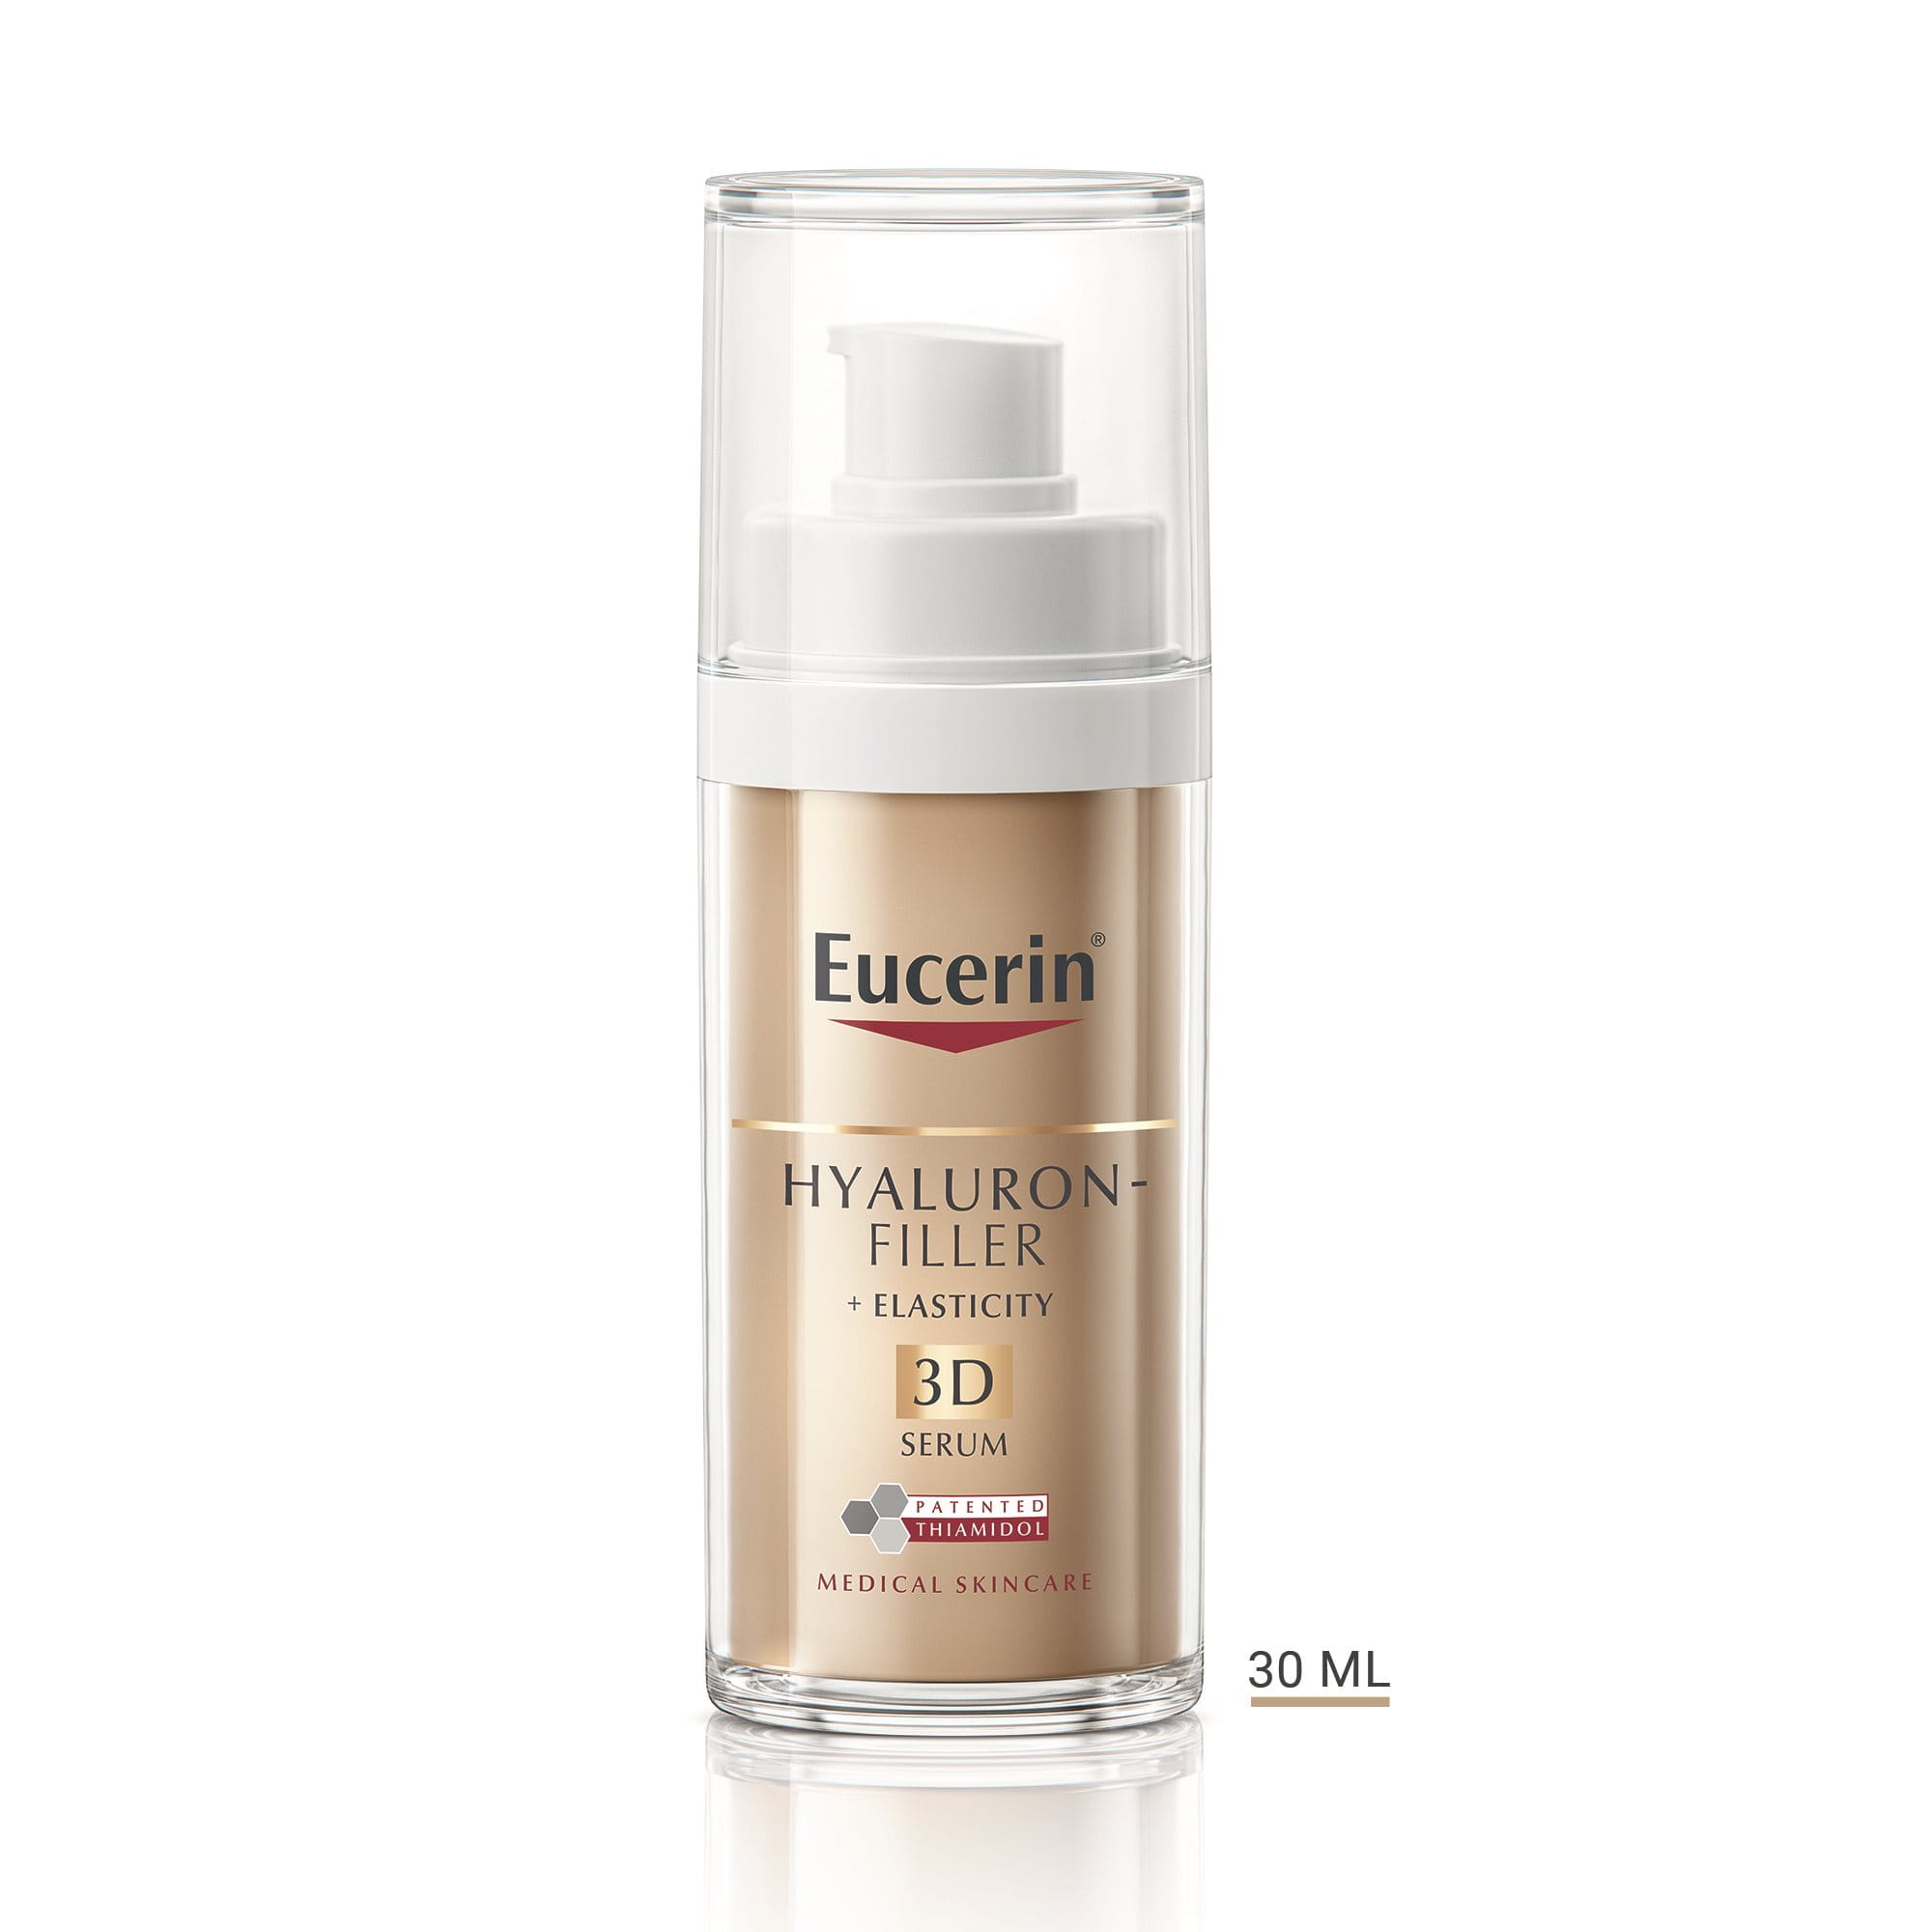 Age spot remover from Eucerin